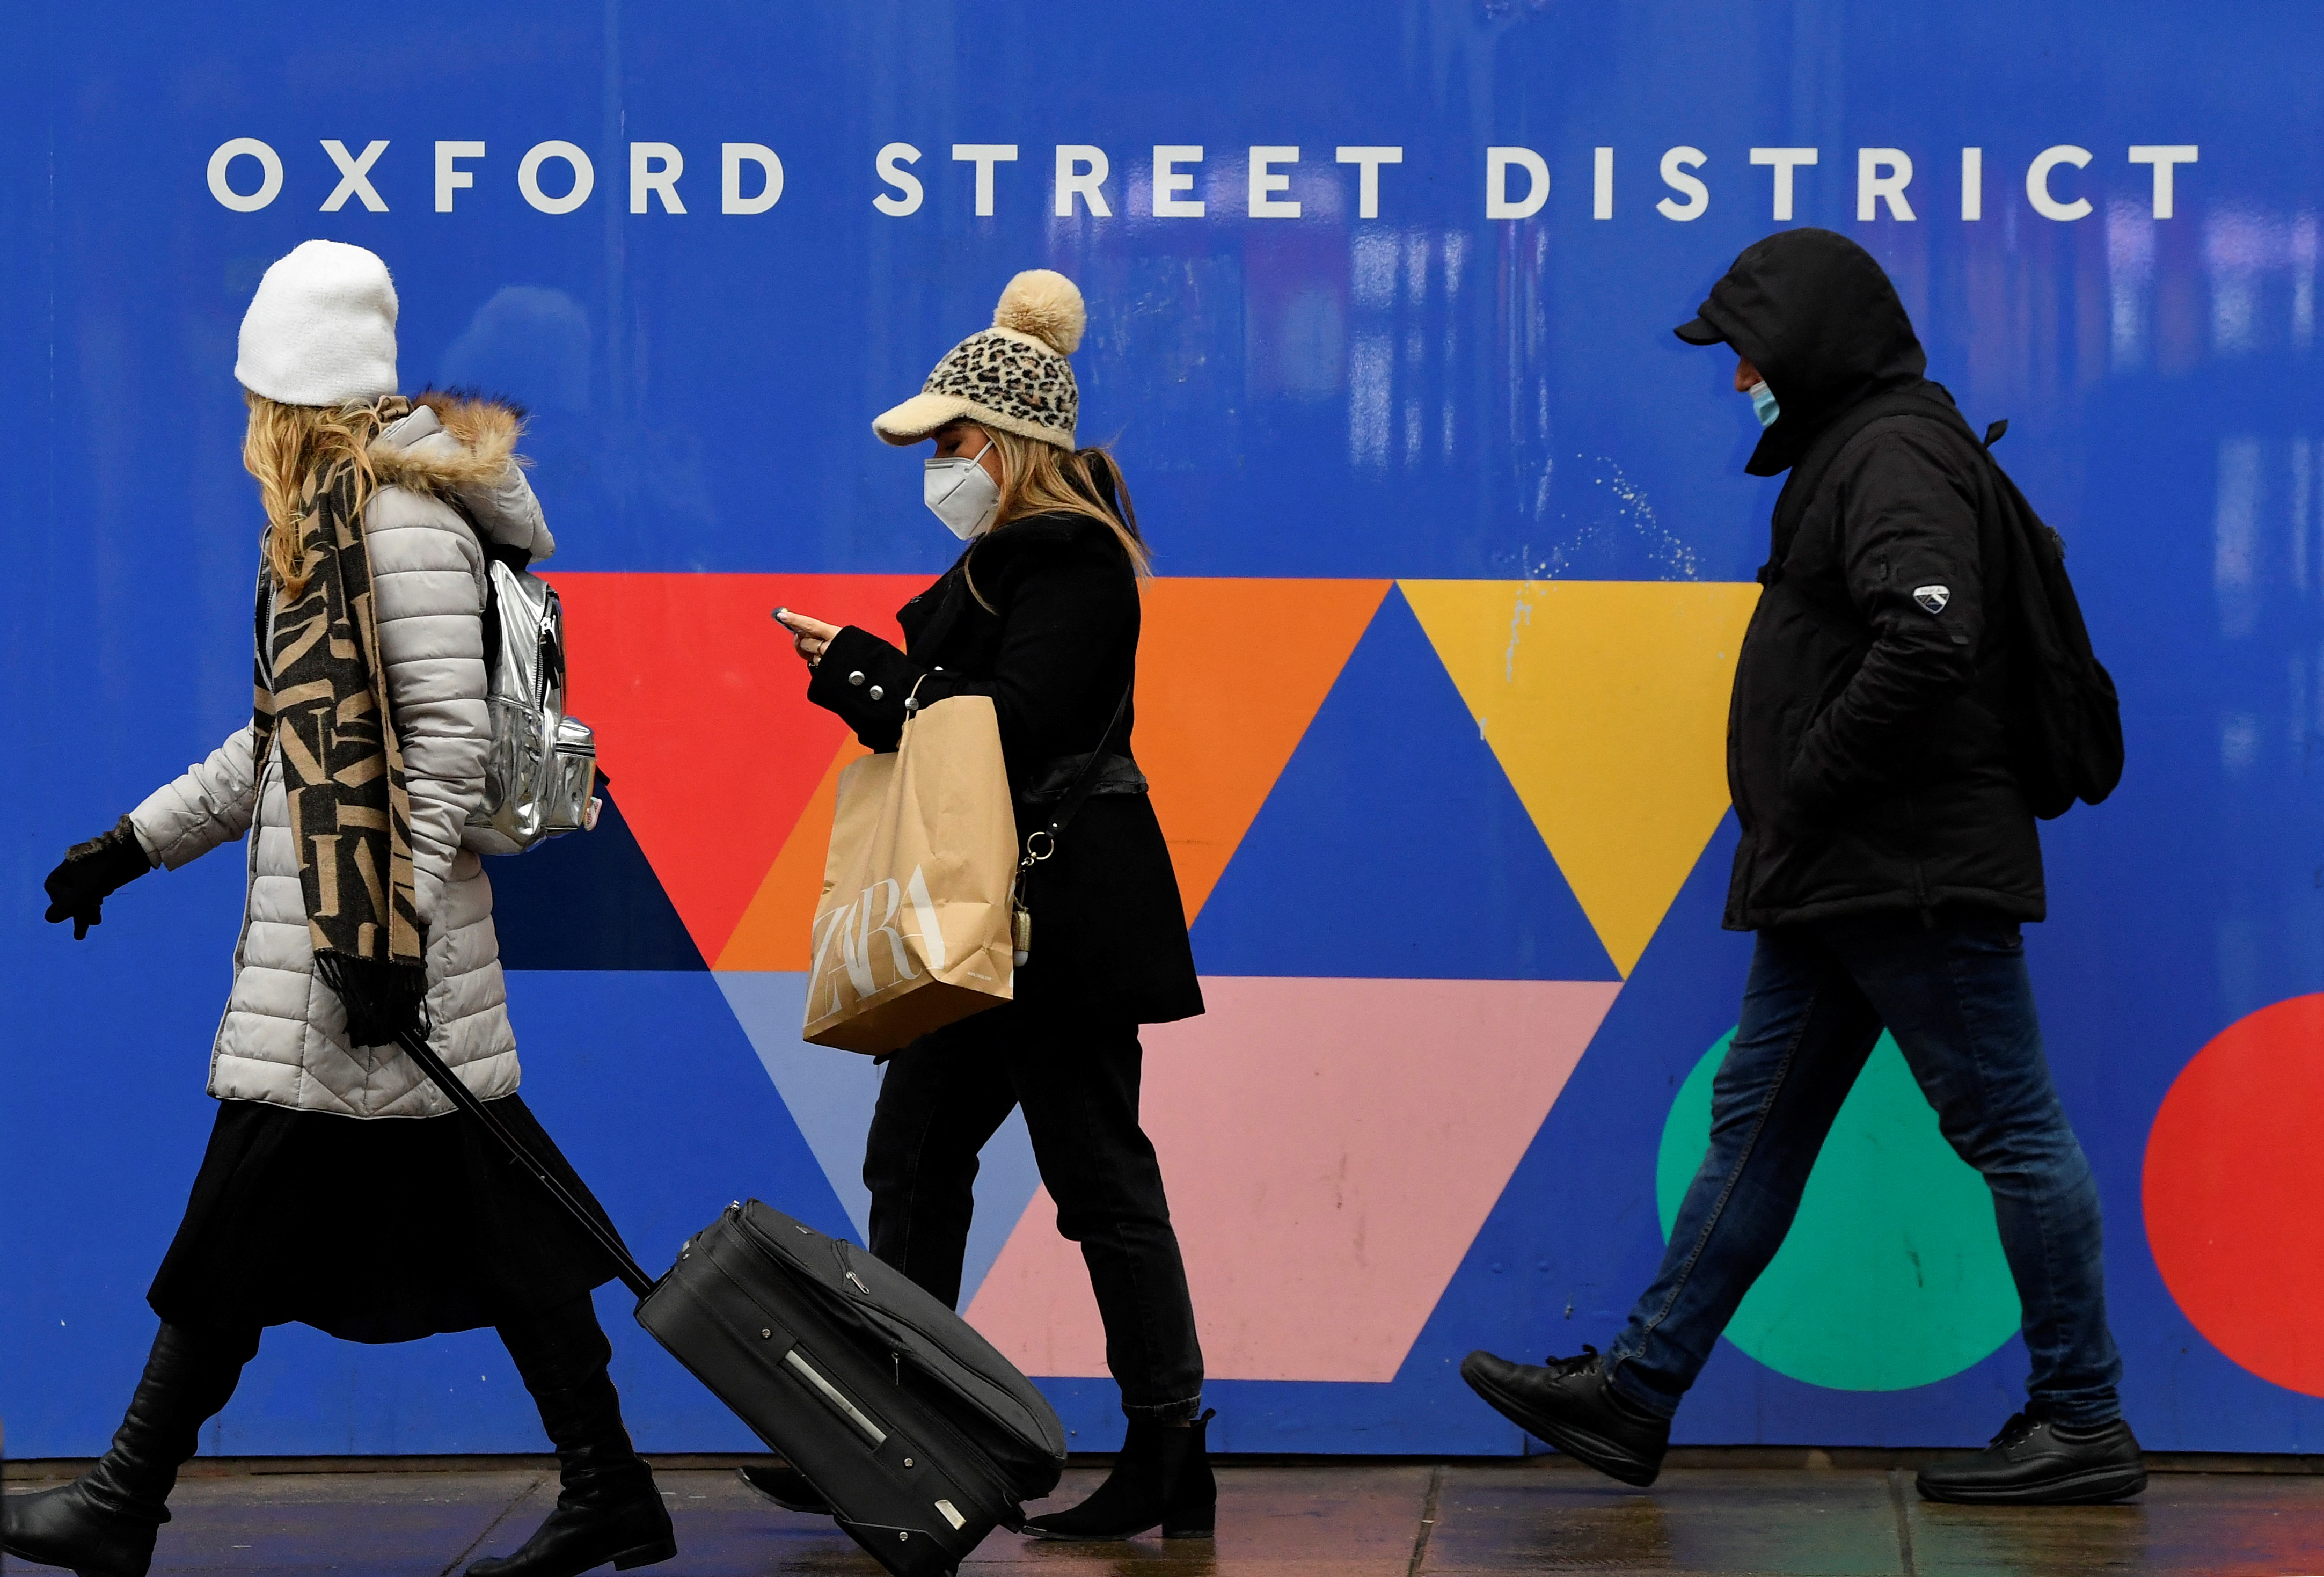 Shoppers walk on Oxford Street as rules on wearing face coverings in some settings in England are relaxed, amid the spread of the coronavirus disease (COVID-19) pandemic, in London